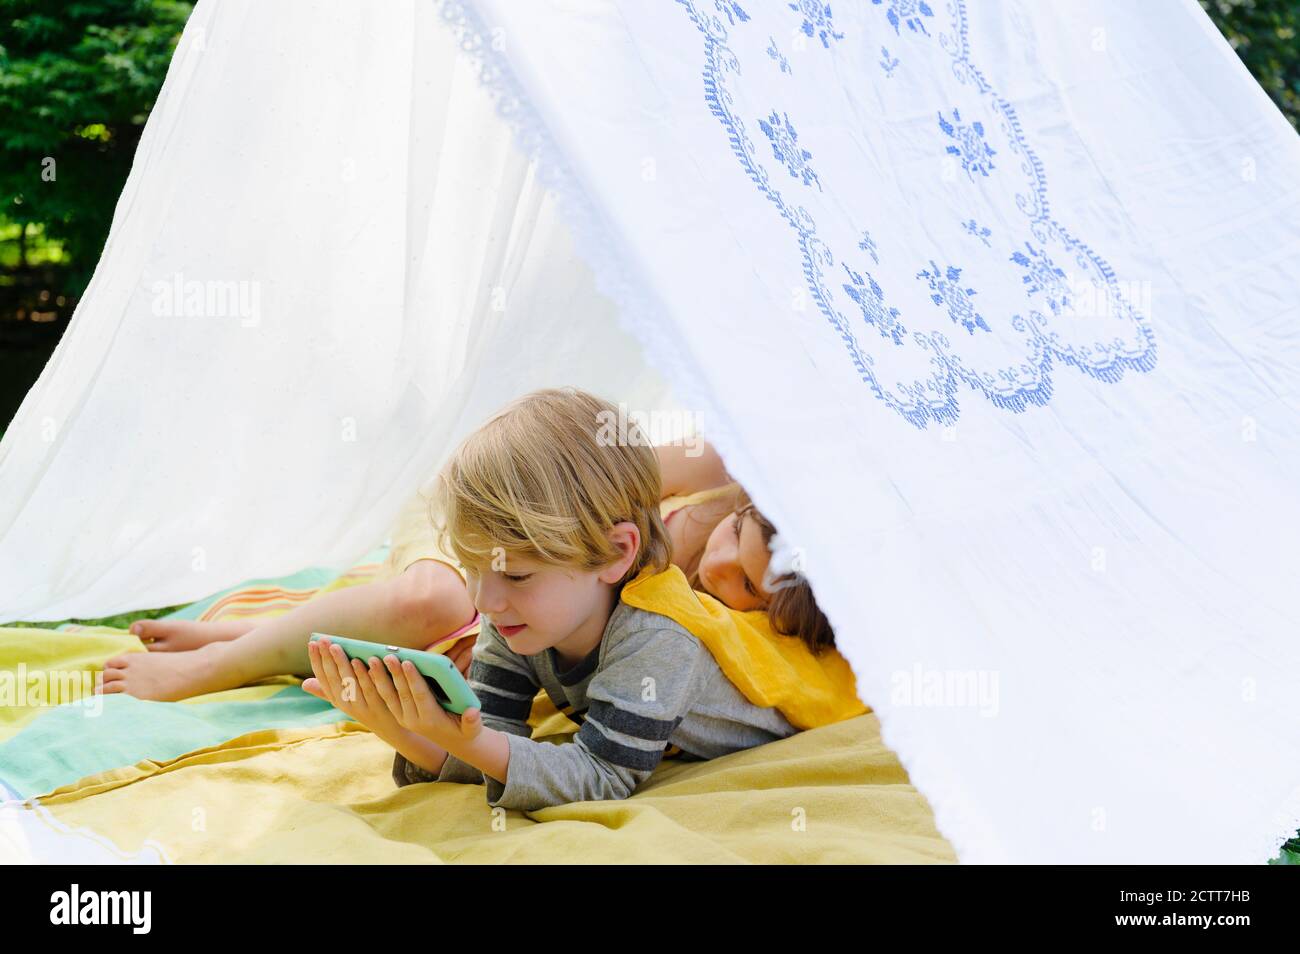 Girl (6-7) and boy (4-5) relaxing in homemade tent in backyard Stock Photo  - Alamy